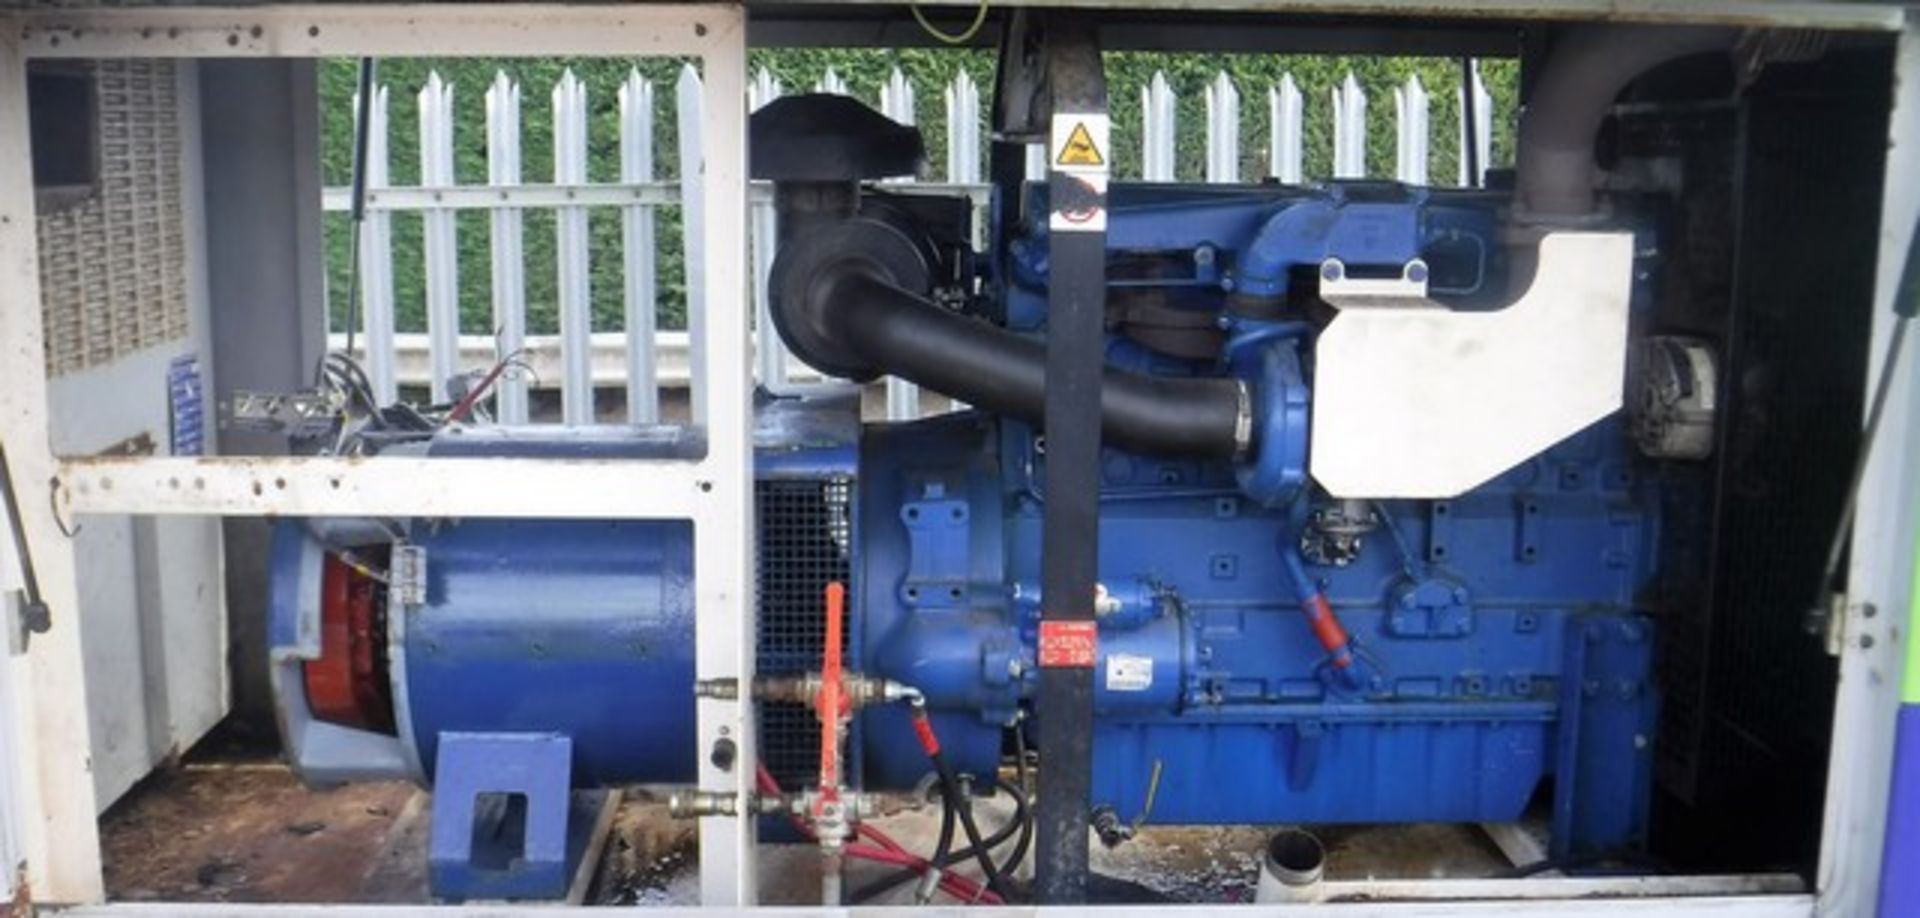 LCH P100 Generator. S/N 0A04108, 100kva, 415 volts. C/W Perkins engine mounted on Indespension twin - Image 5 of 9